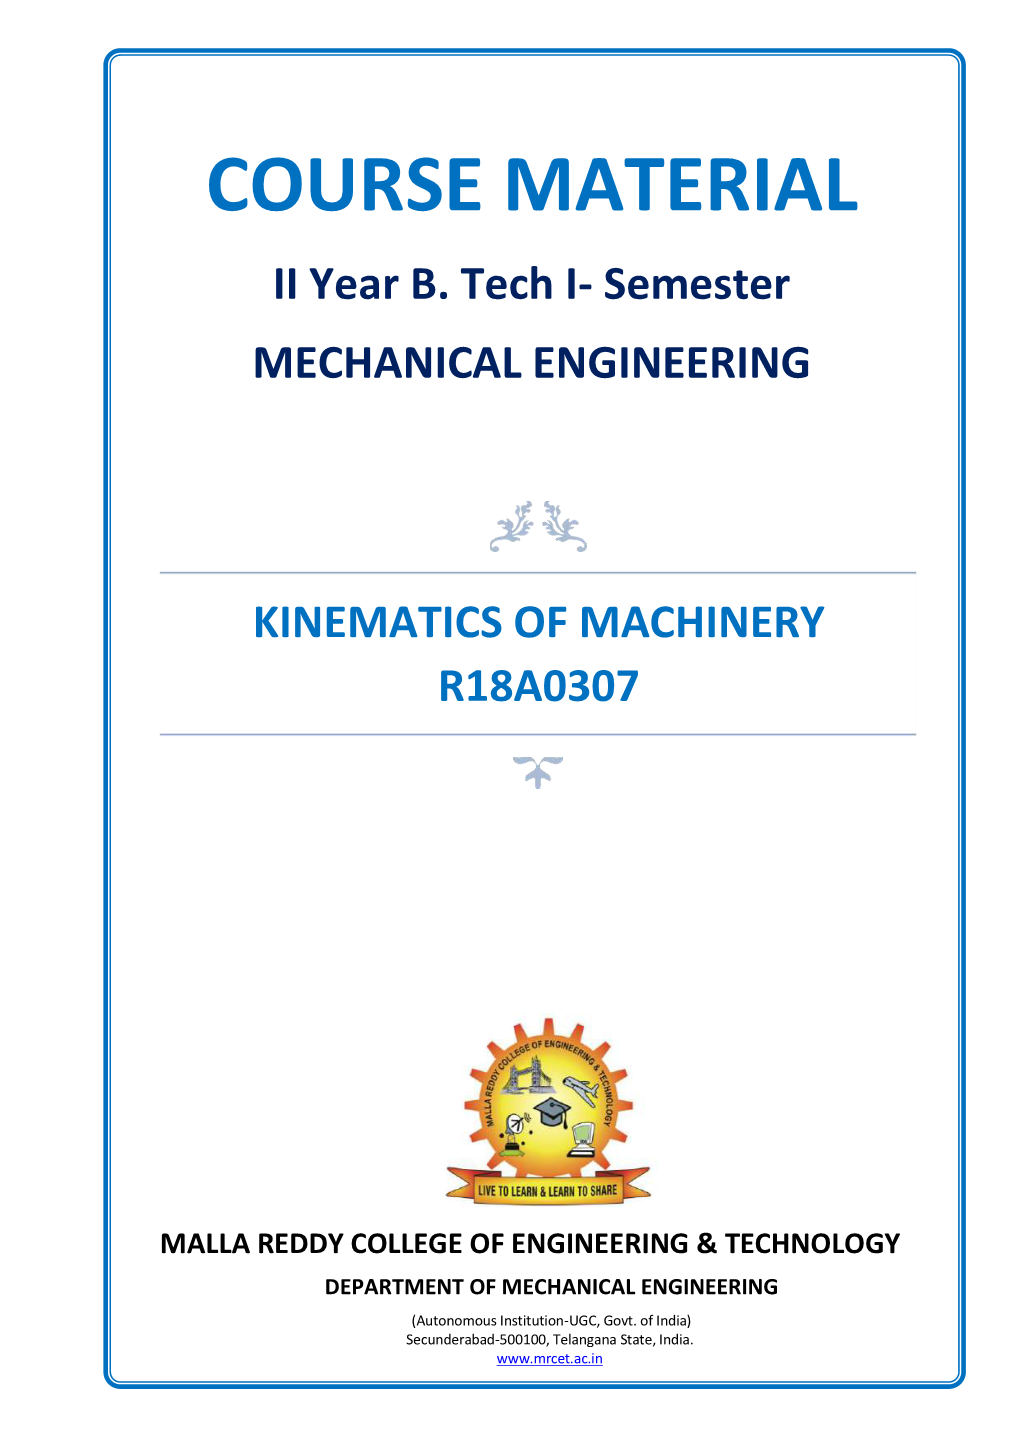 Kinematics of Machinery R18a0307